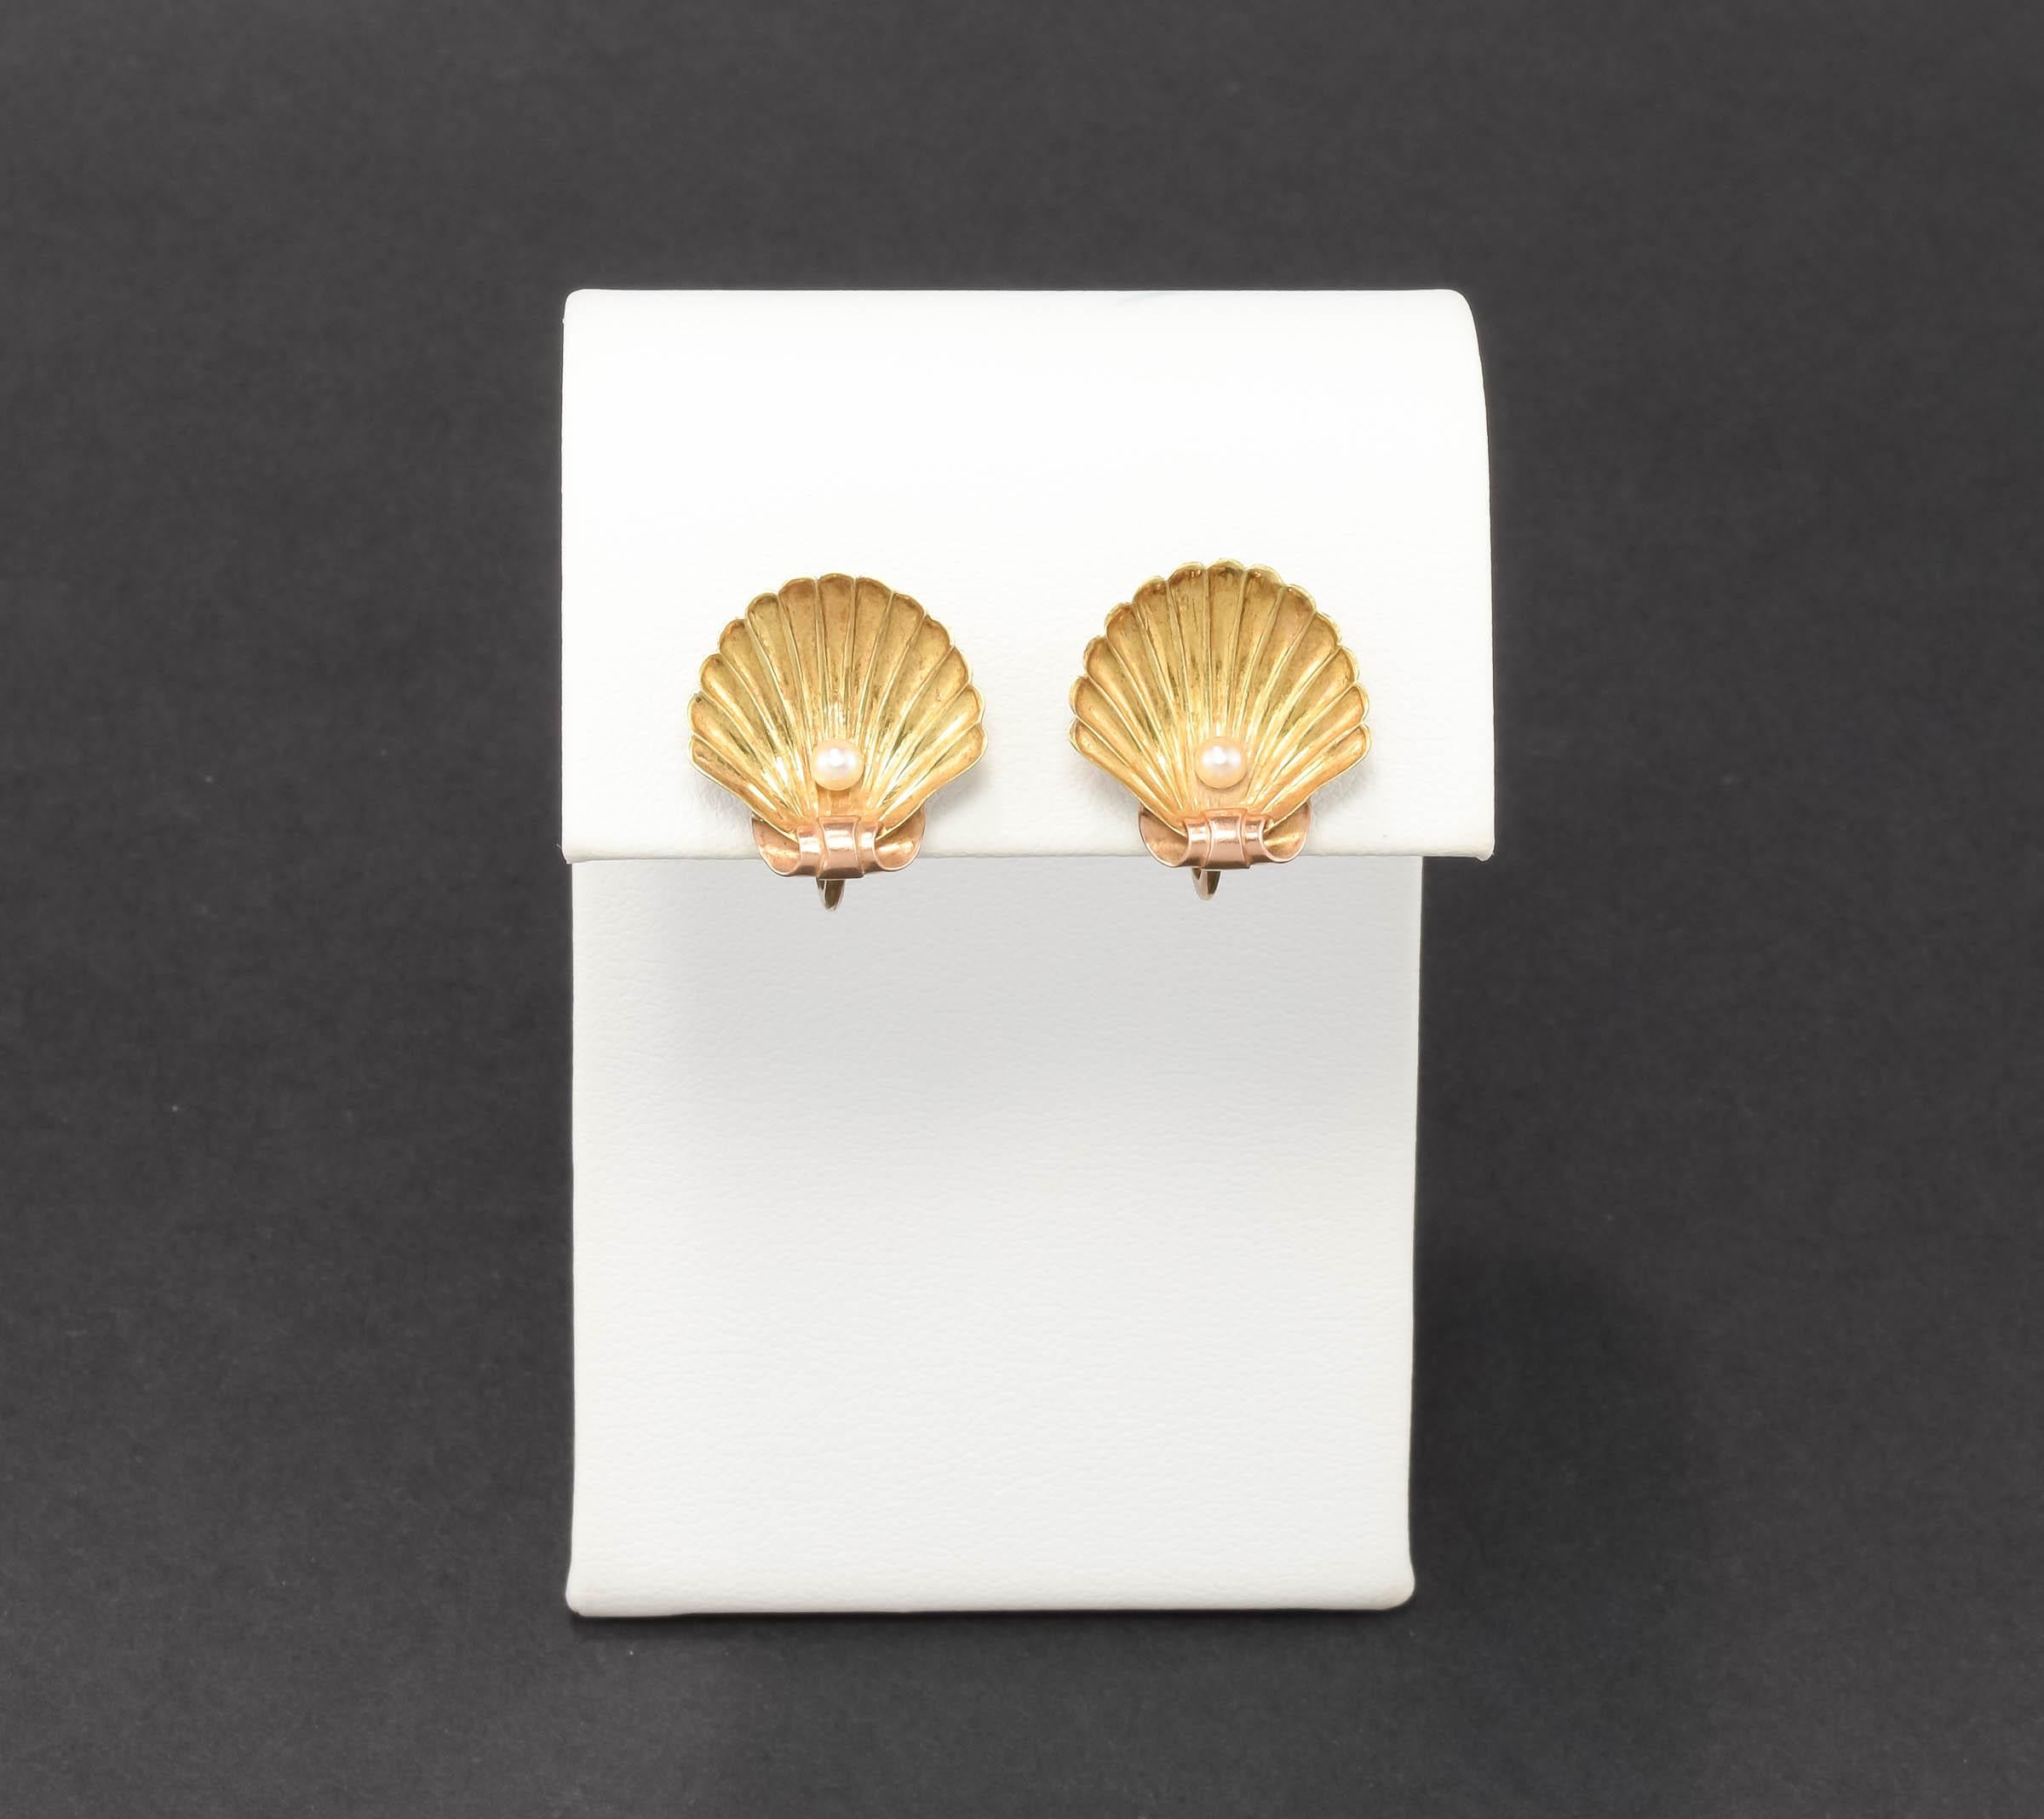 Antique 14K Gold Shell Earrings w Pearls by Sloan & Co. French Screw Back Style For Sale 6